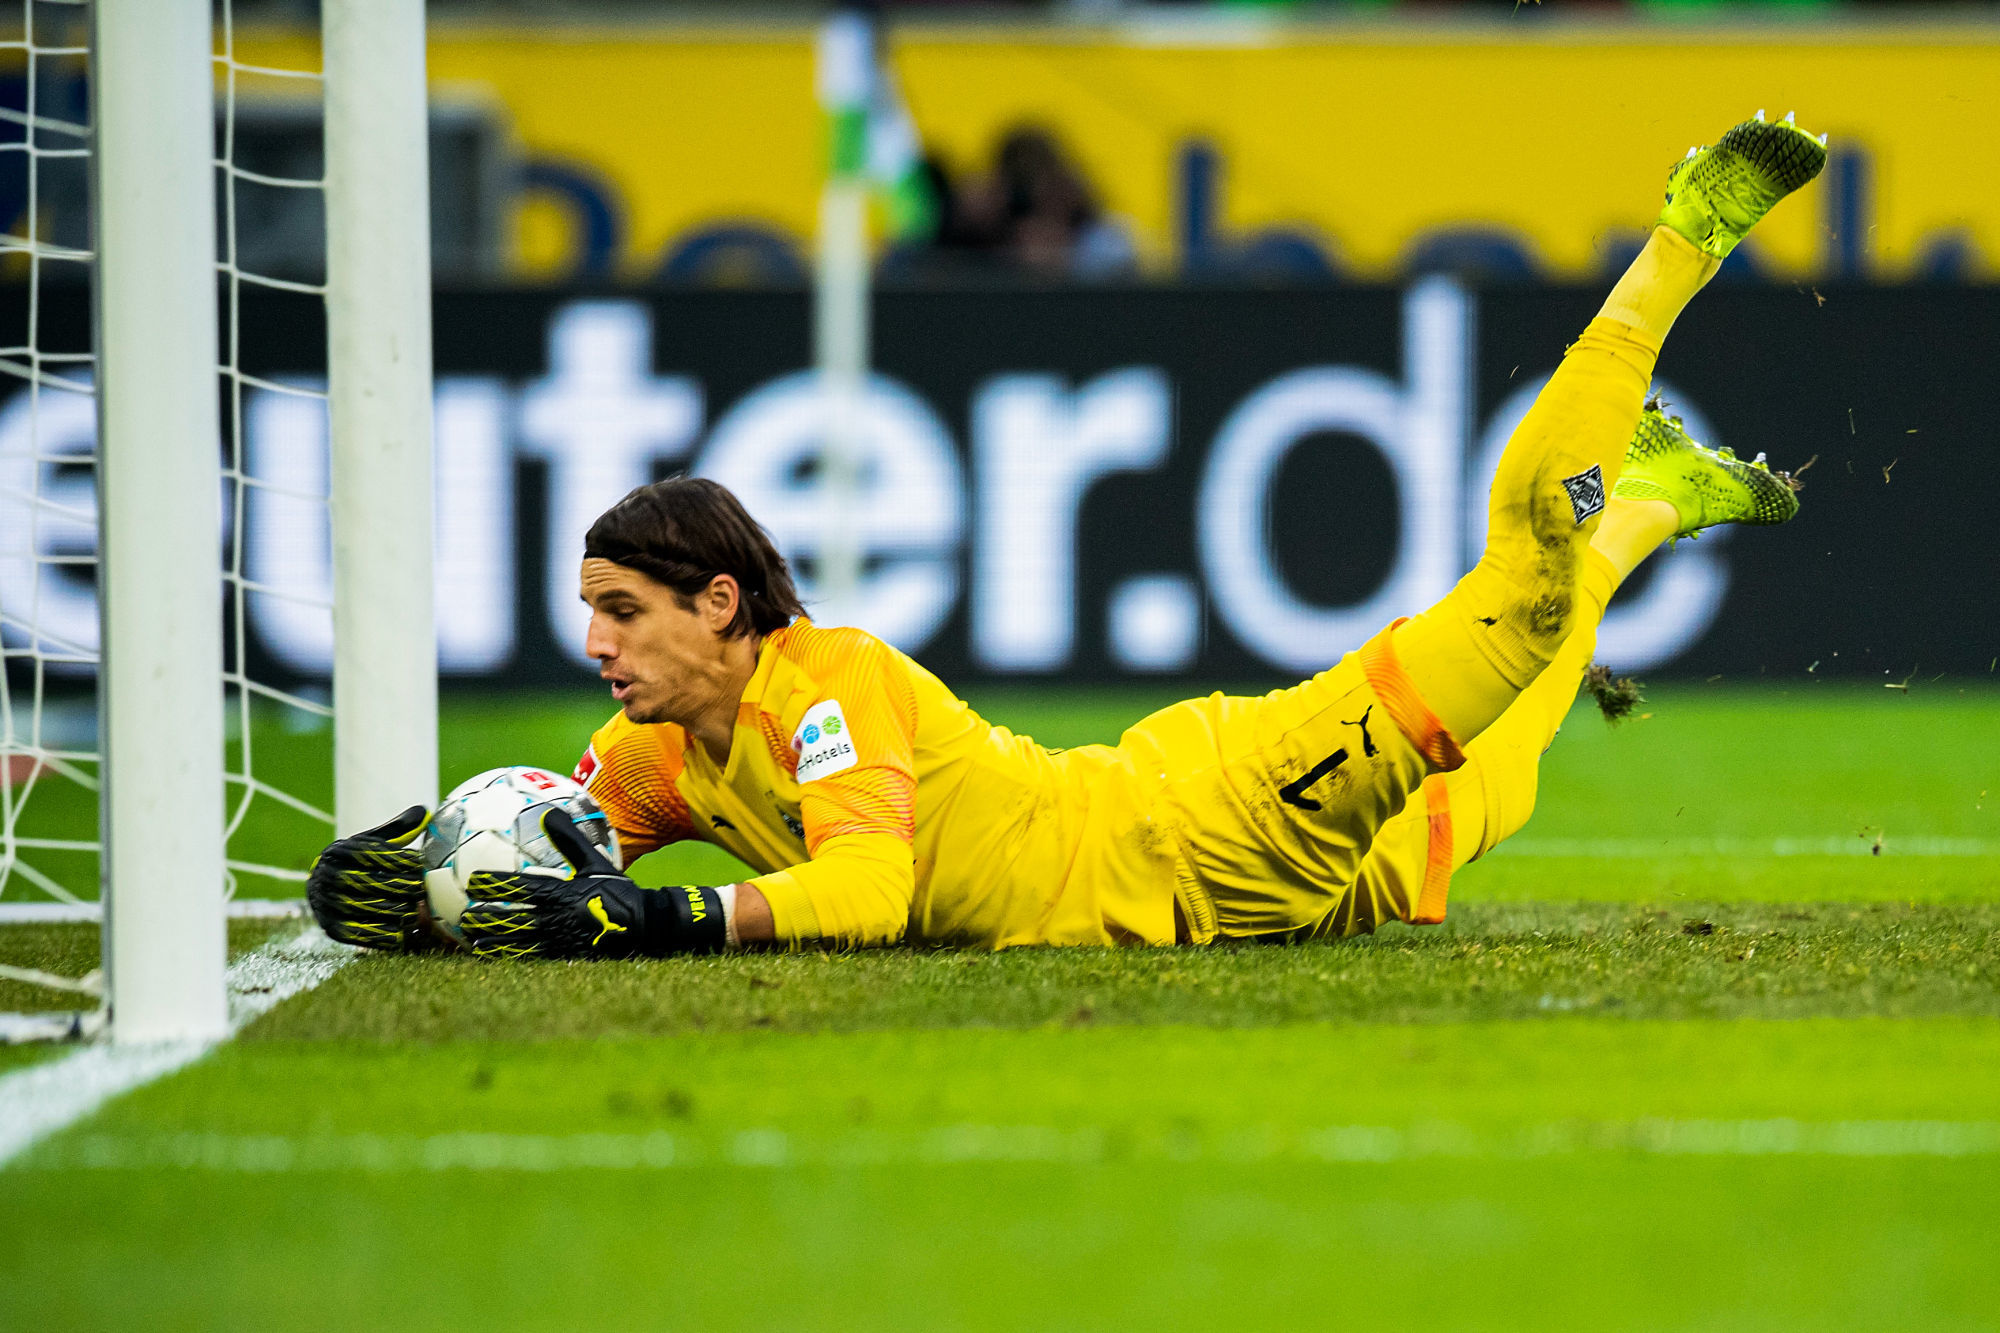 Goalkeeper Yann SOMMER (MG) saves the ball just before the goallinie, action, goalkeeper error, football 1. Bundesliga, 14.matchday, Borussia Monchengladbach (MG) - Bayern M¸nchen (M), on 07.12.2019 in Borussia Monchengladbach / Germany. ¨ | usage worldwide 
Photo by Icon Sport - Yann SOMMER - Borussia-Park - Monchengladbach (Allemagne)